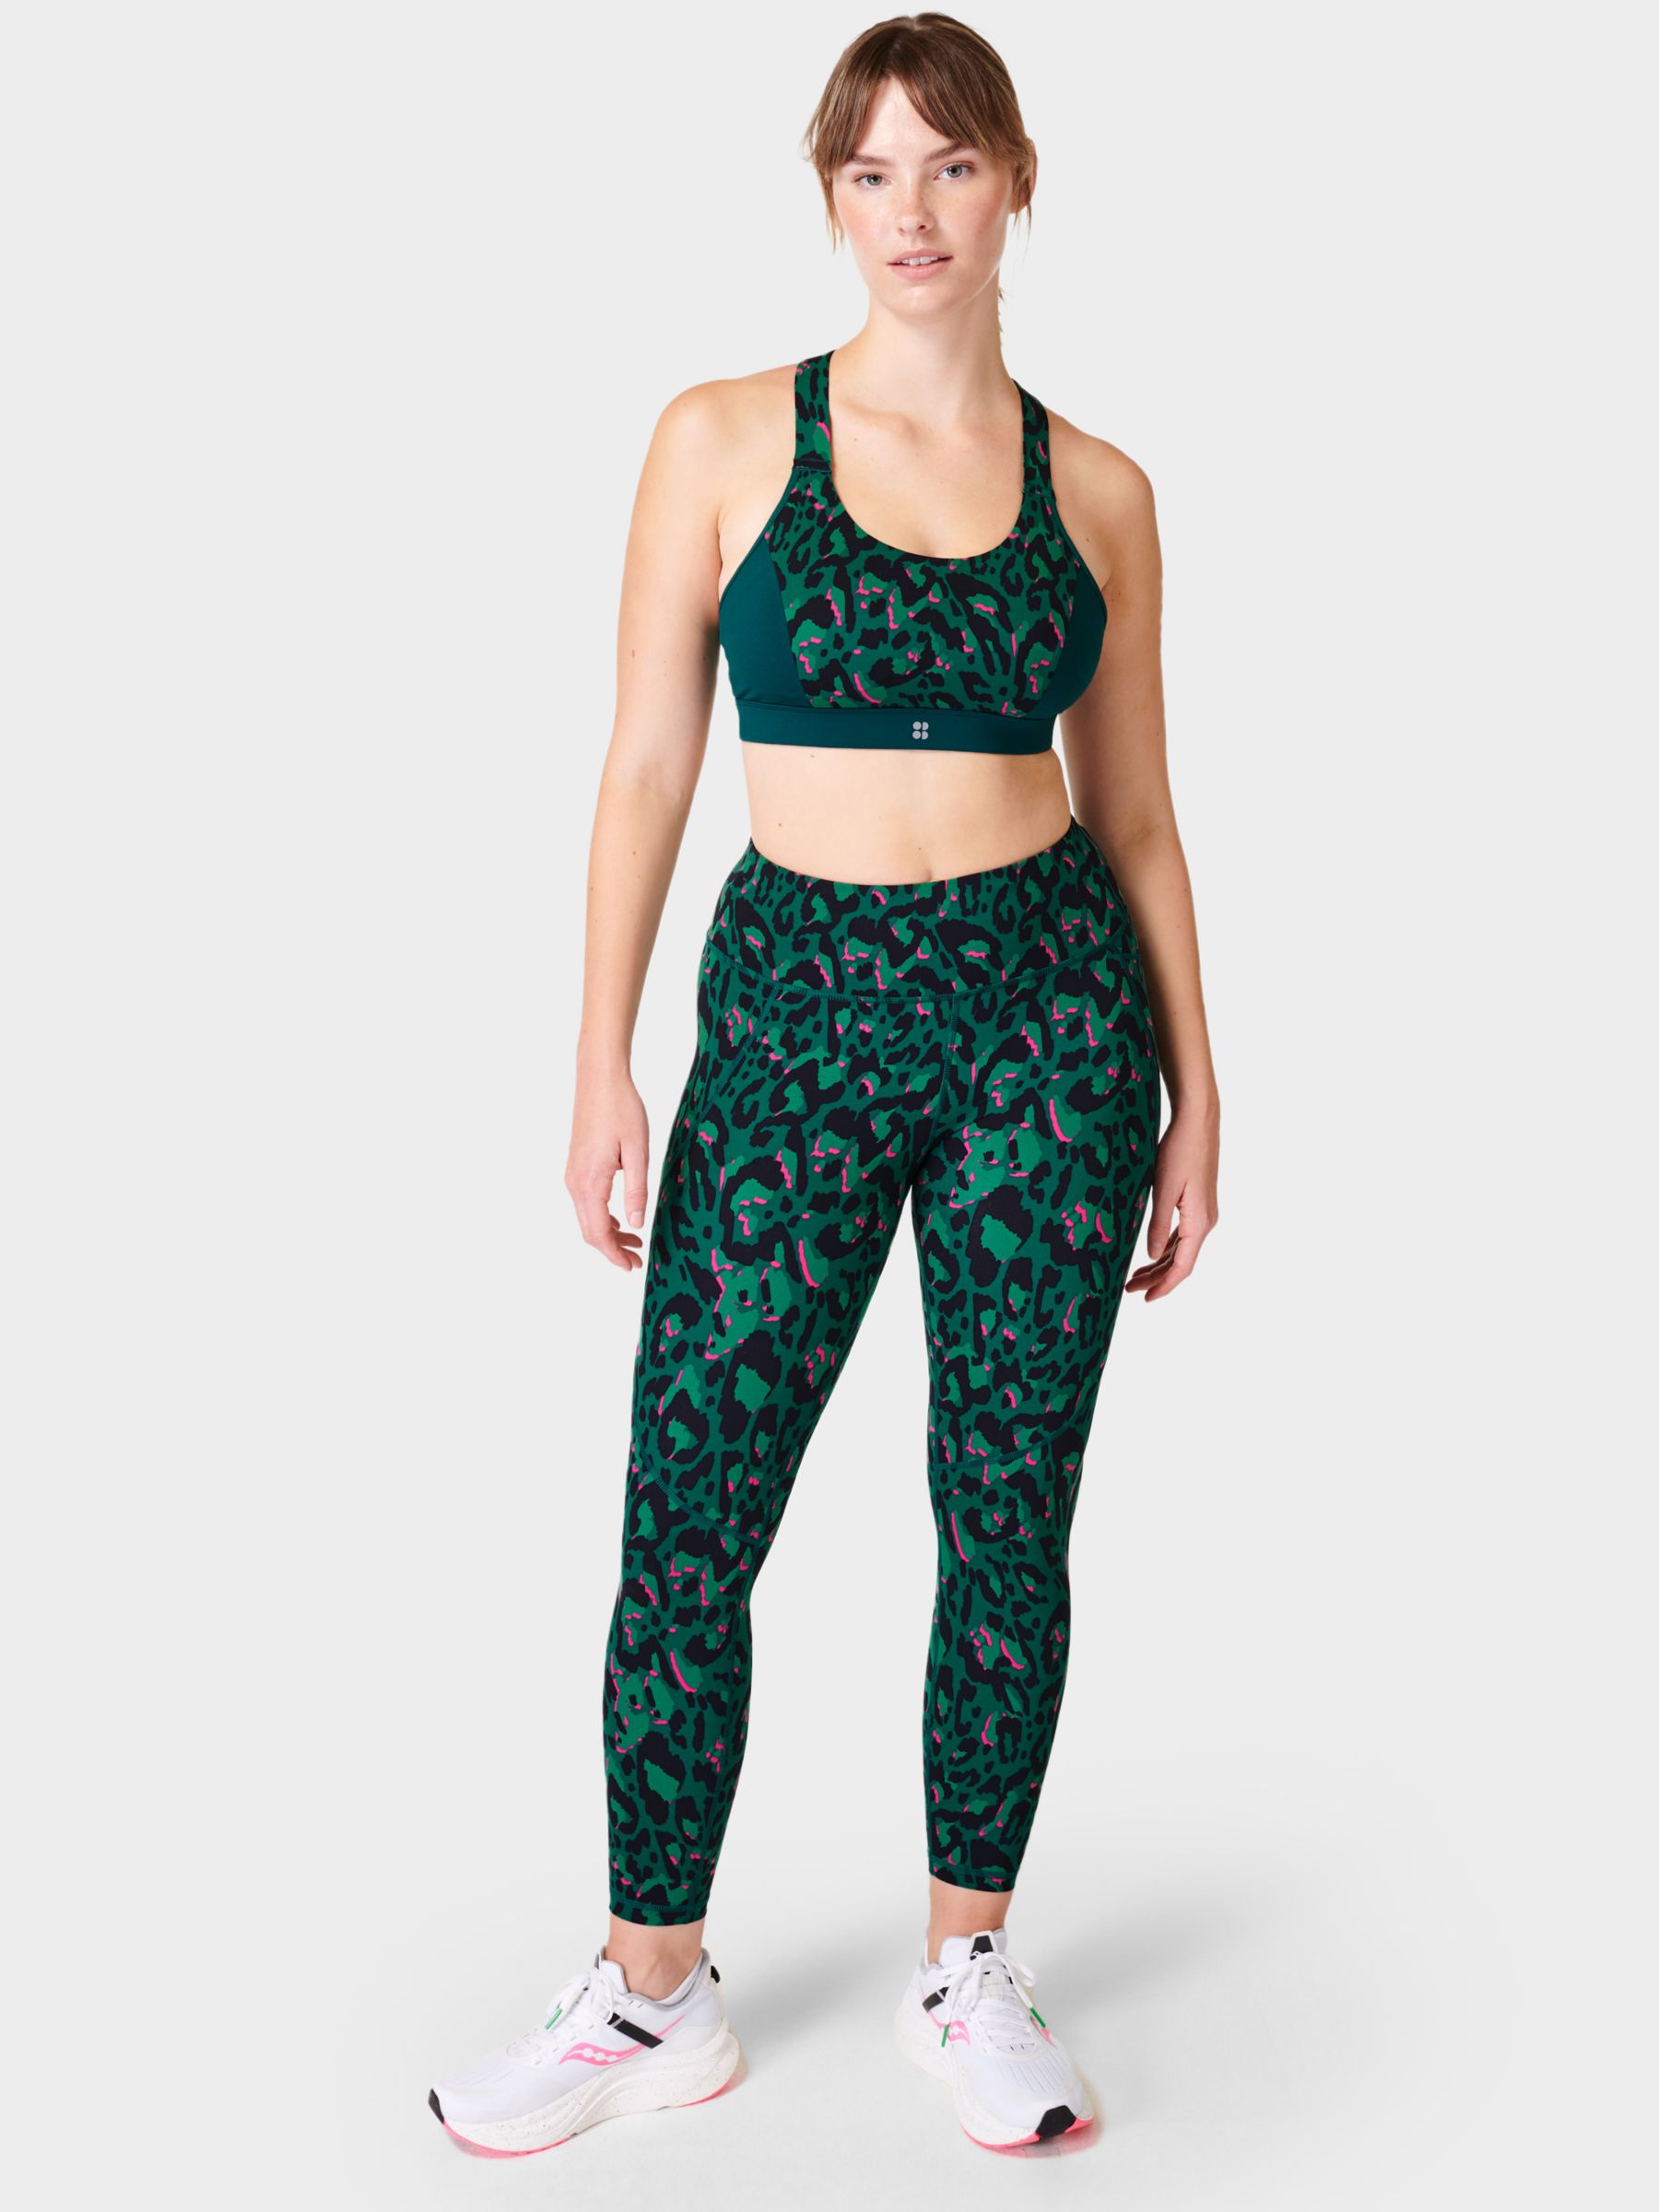 Sweaty Betty Power 7/8 Gym Leggings, Green Brushed Leopard Print at ...